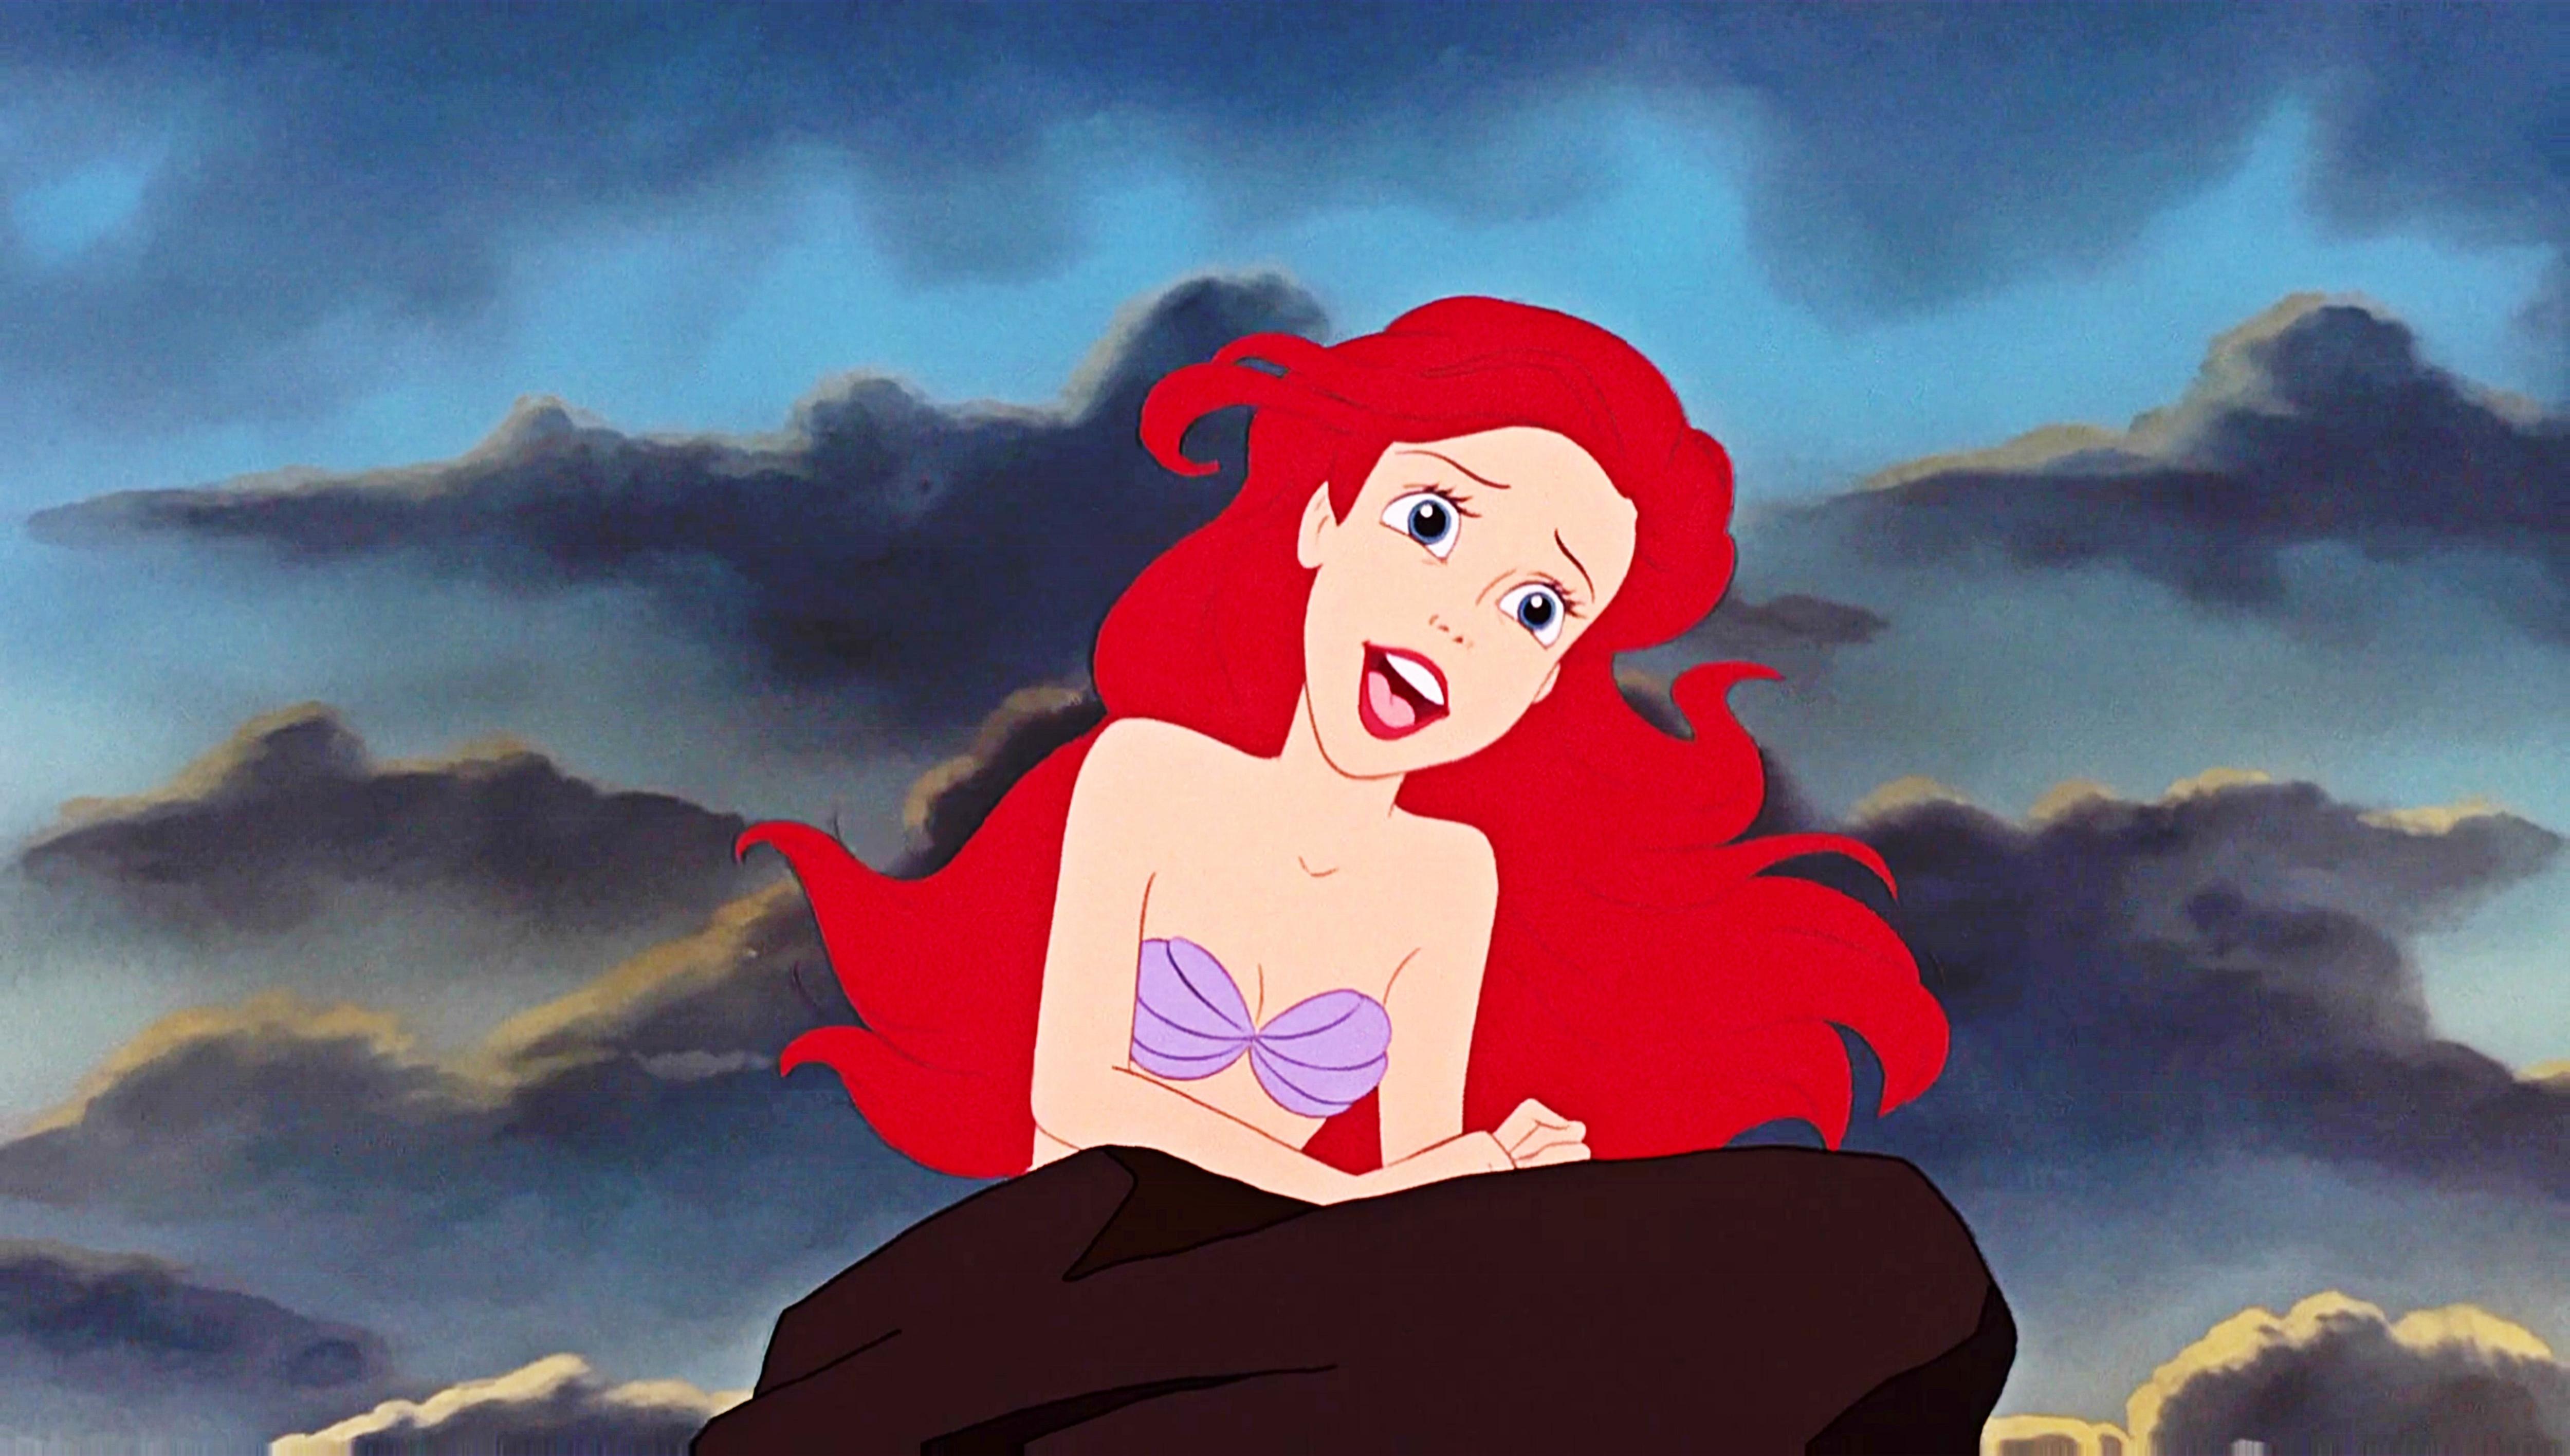 Could The Little Mermaid Get The Live Action Treatment